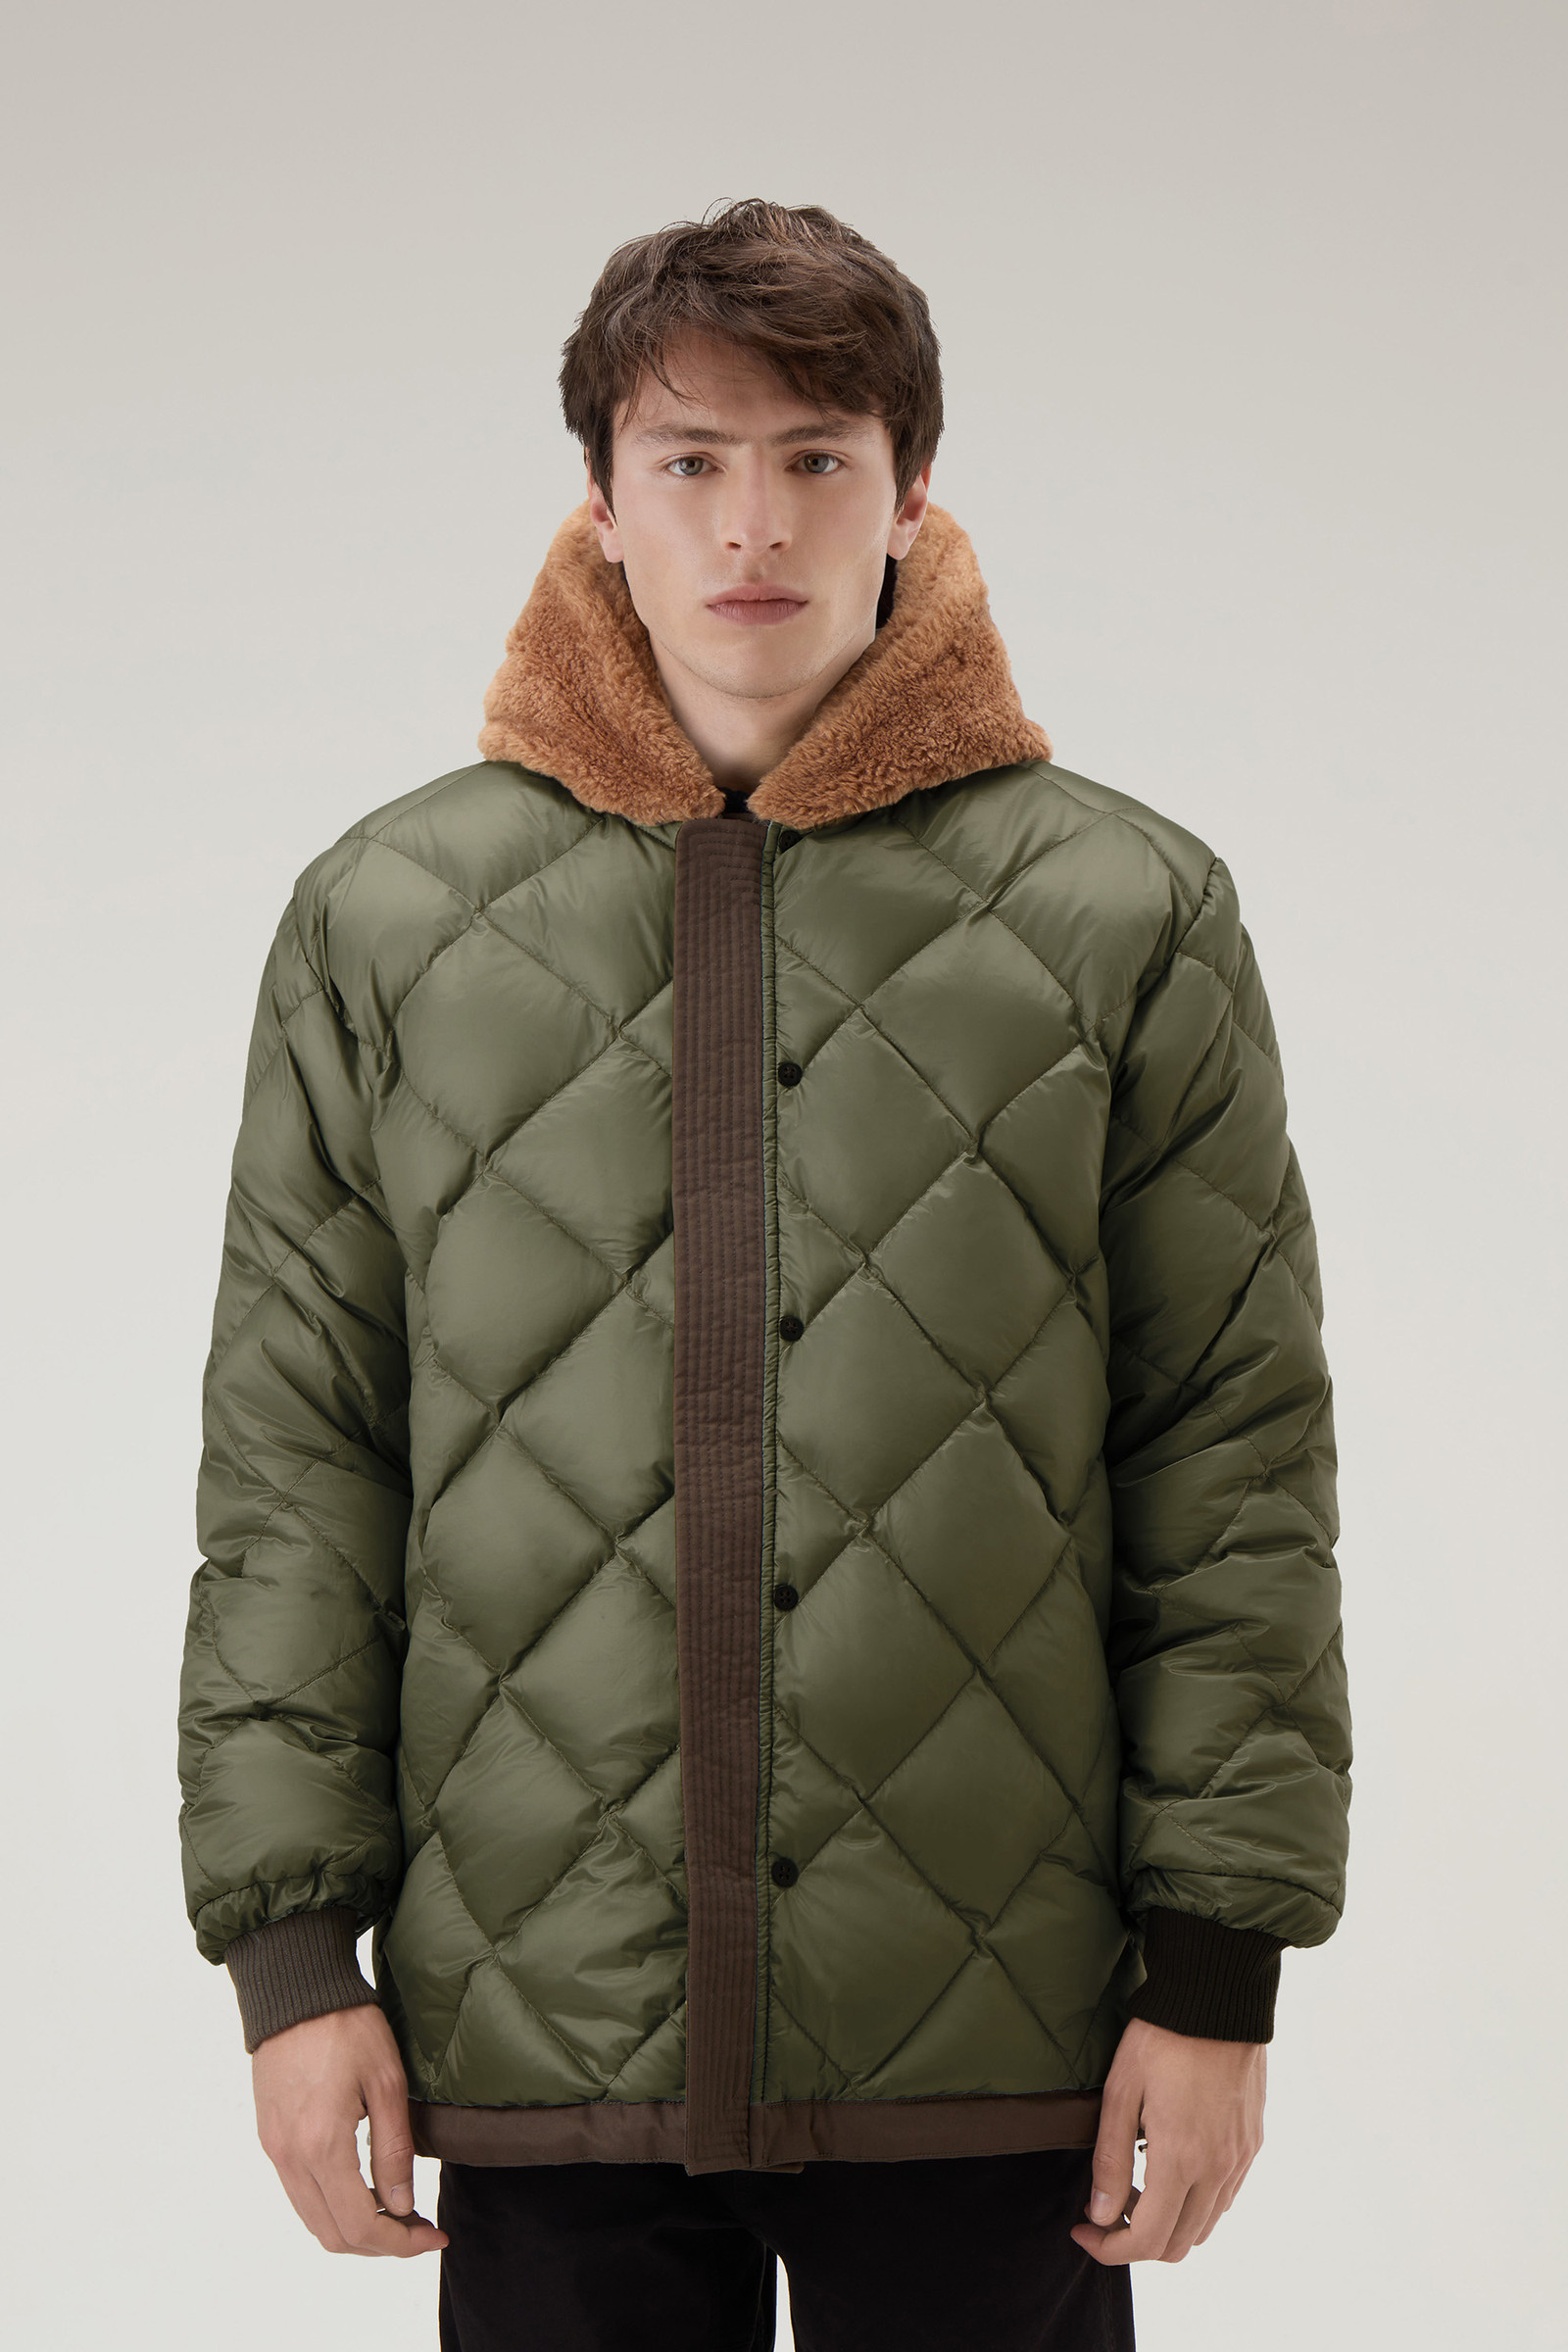 Hooded Parka With Sherpa Lining Recycled Polyester Padding,, 46% OFF